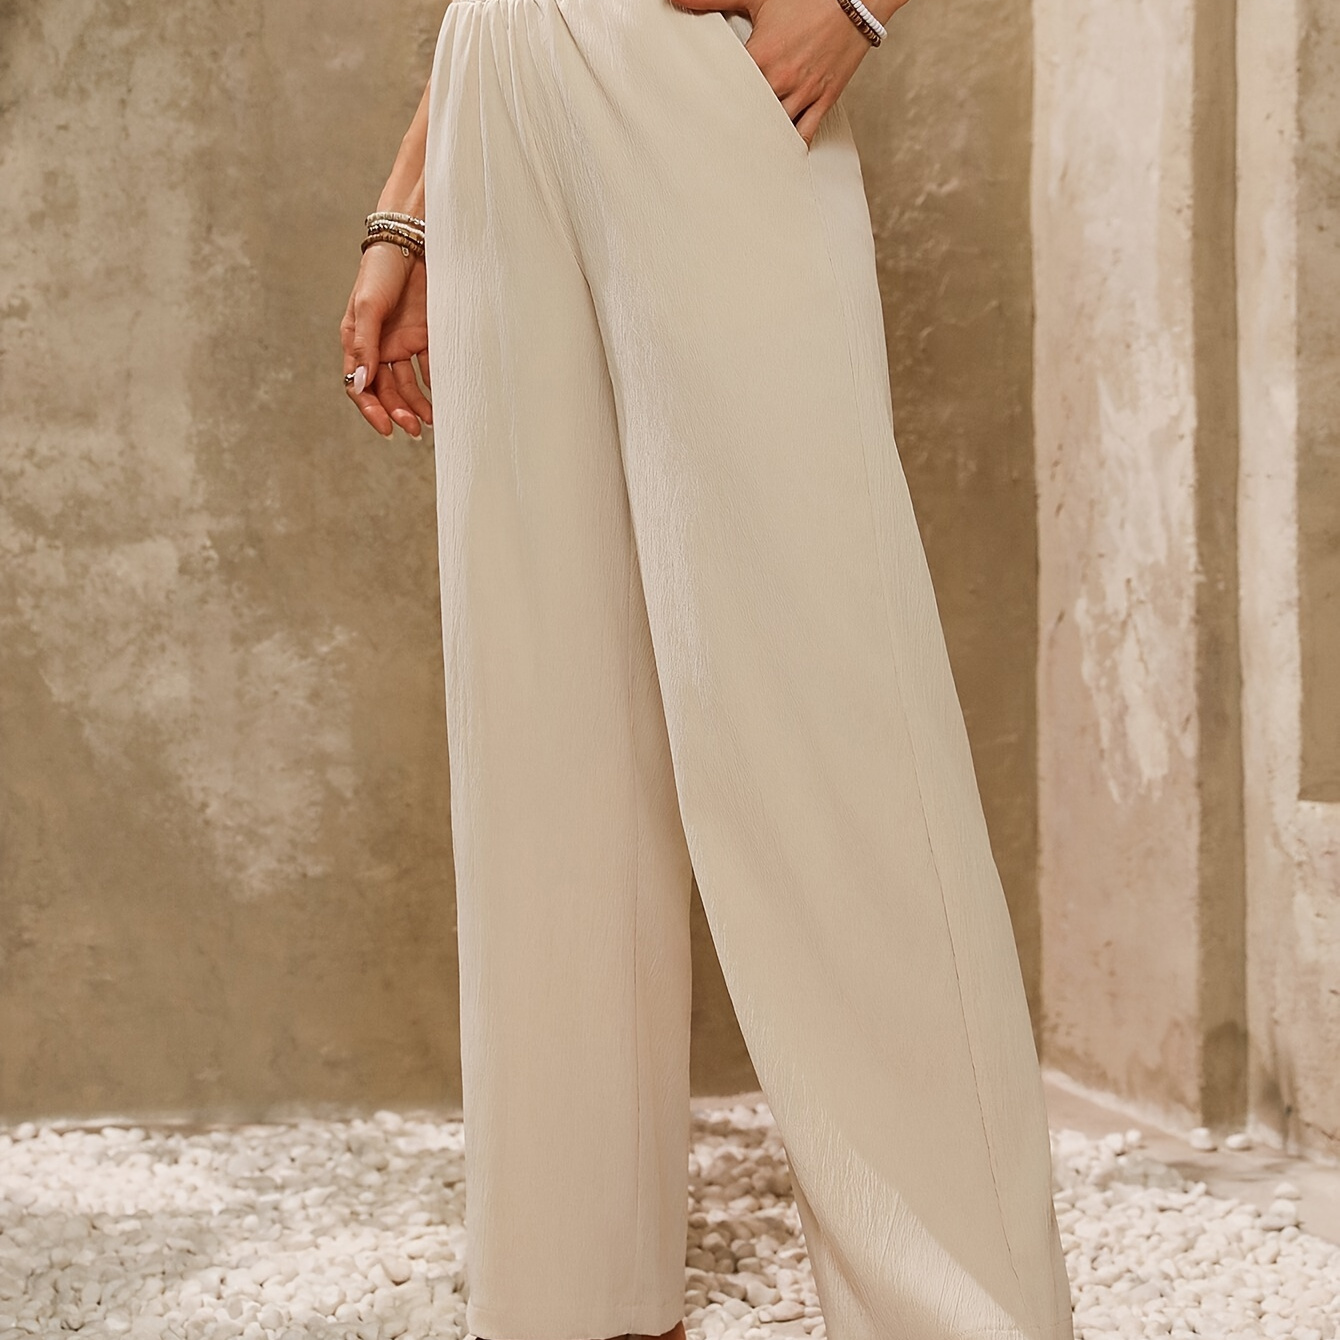 

Solid Color Wide Leg Pants, Casual Elastic Waist Pocket Pants For Spring & Summer, Women's Clothing